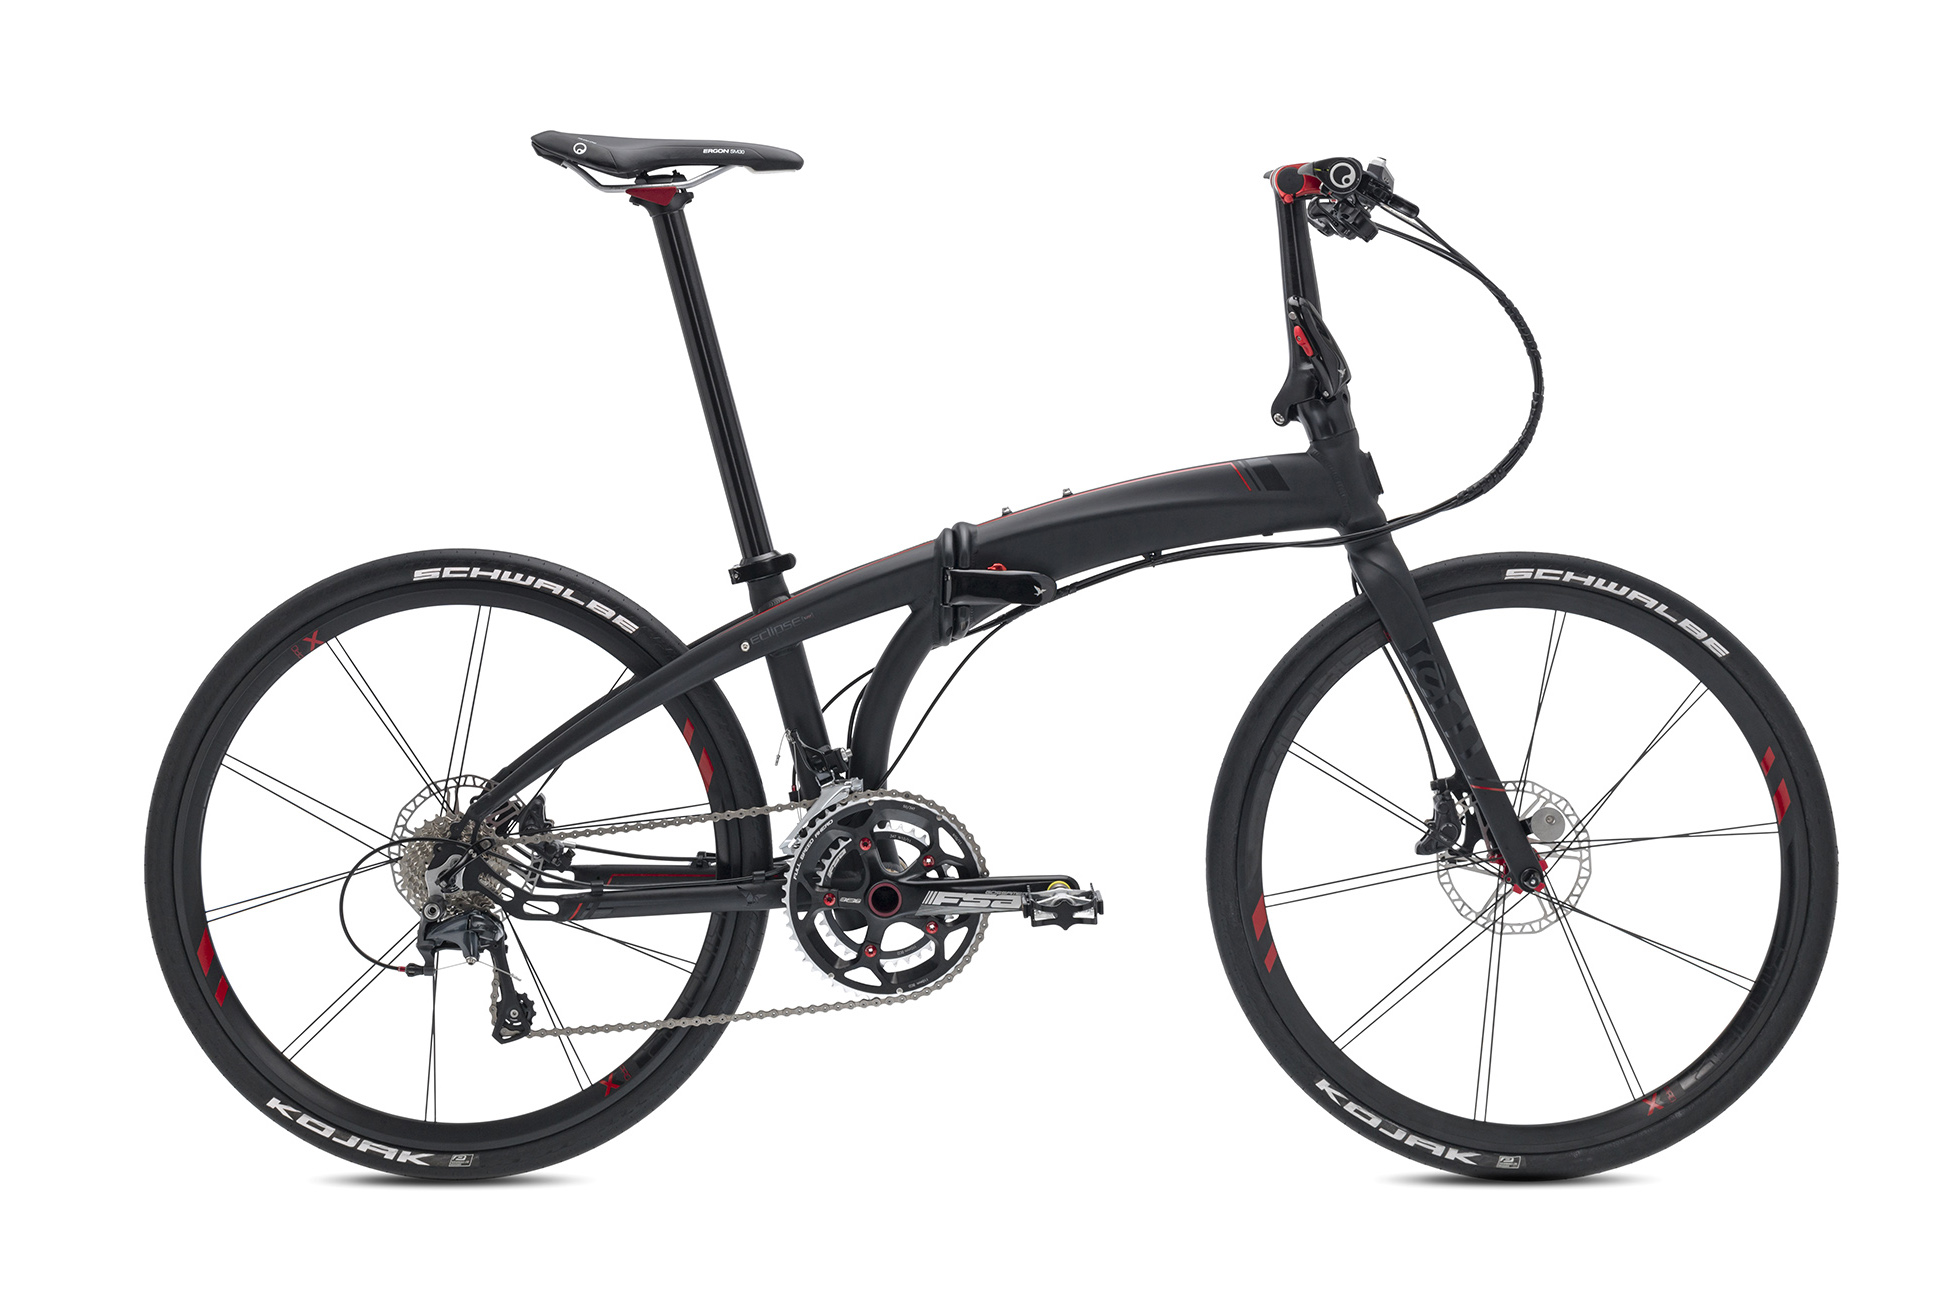 Eclipse X22 - Full size folding bicycle